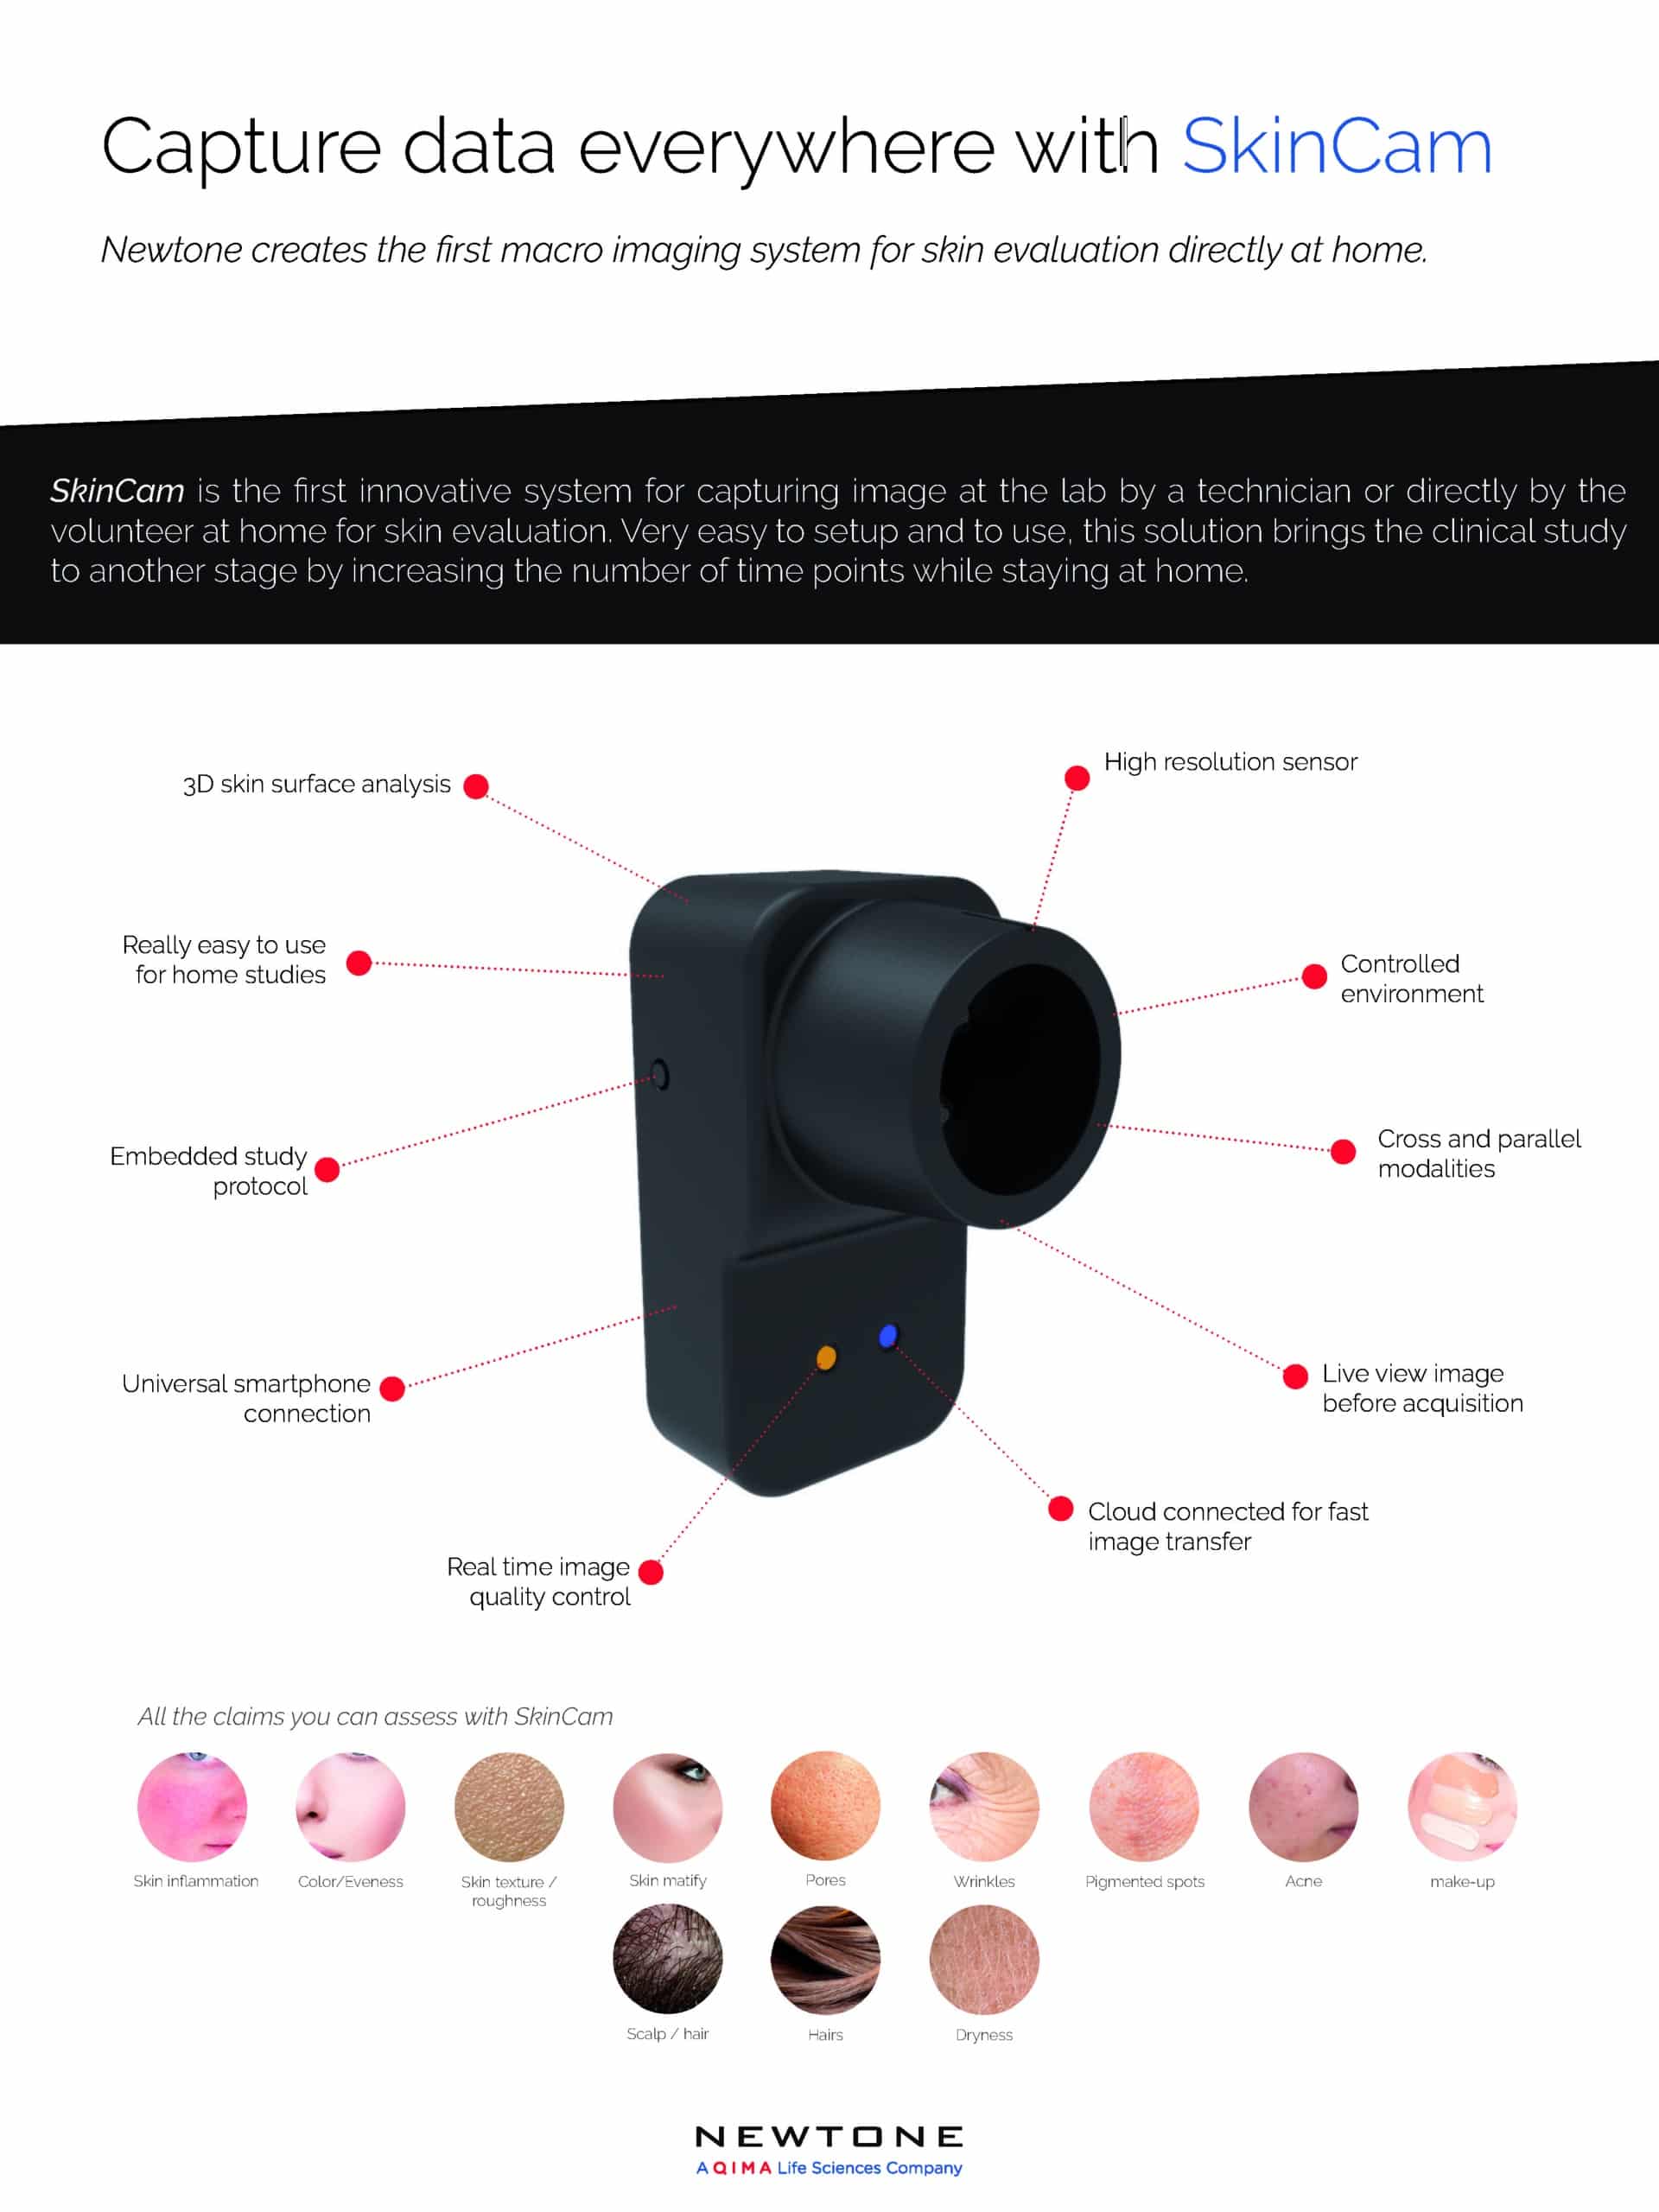 Skincam is portable clinical imaging device.